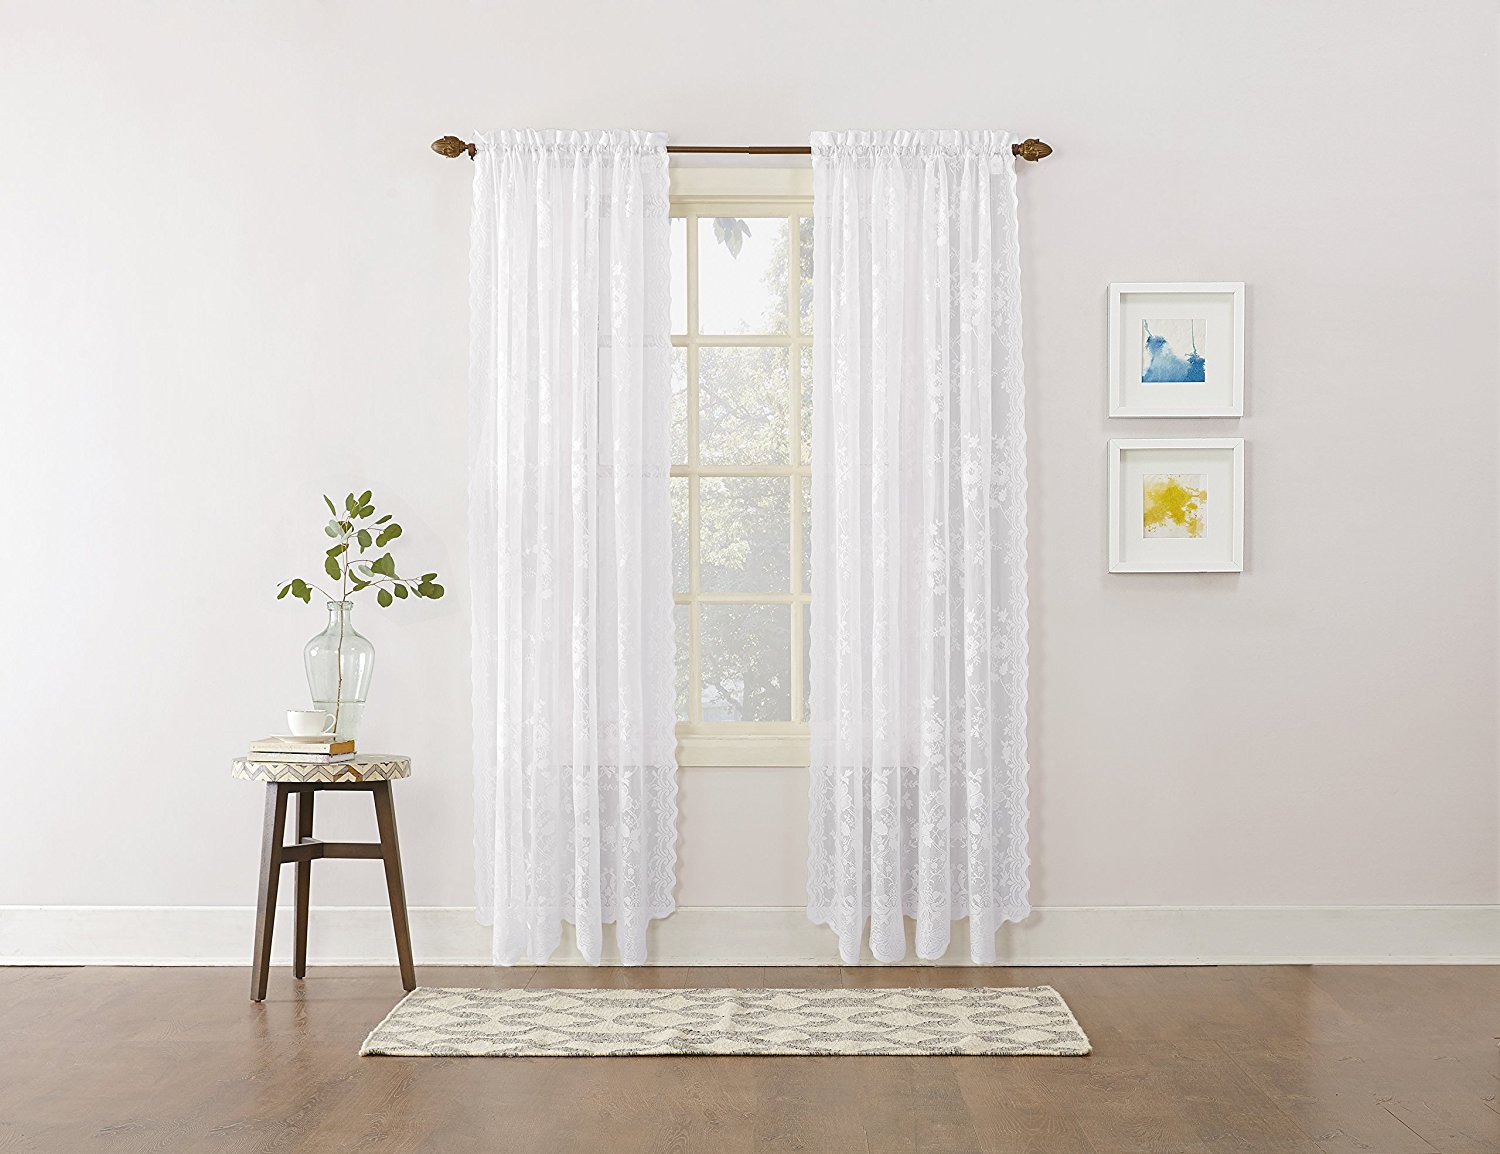 Top 10 Best Lace Curtains for Your Home | Heavy.com